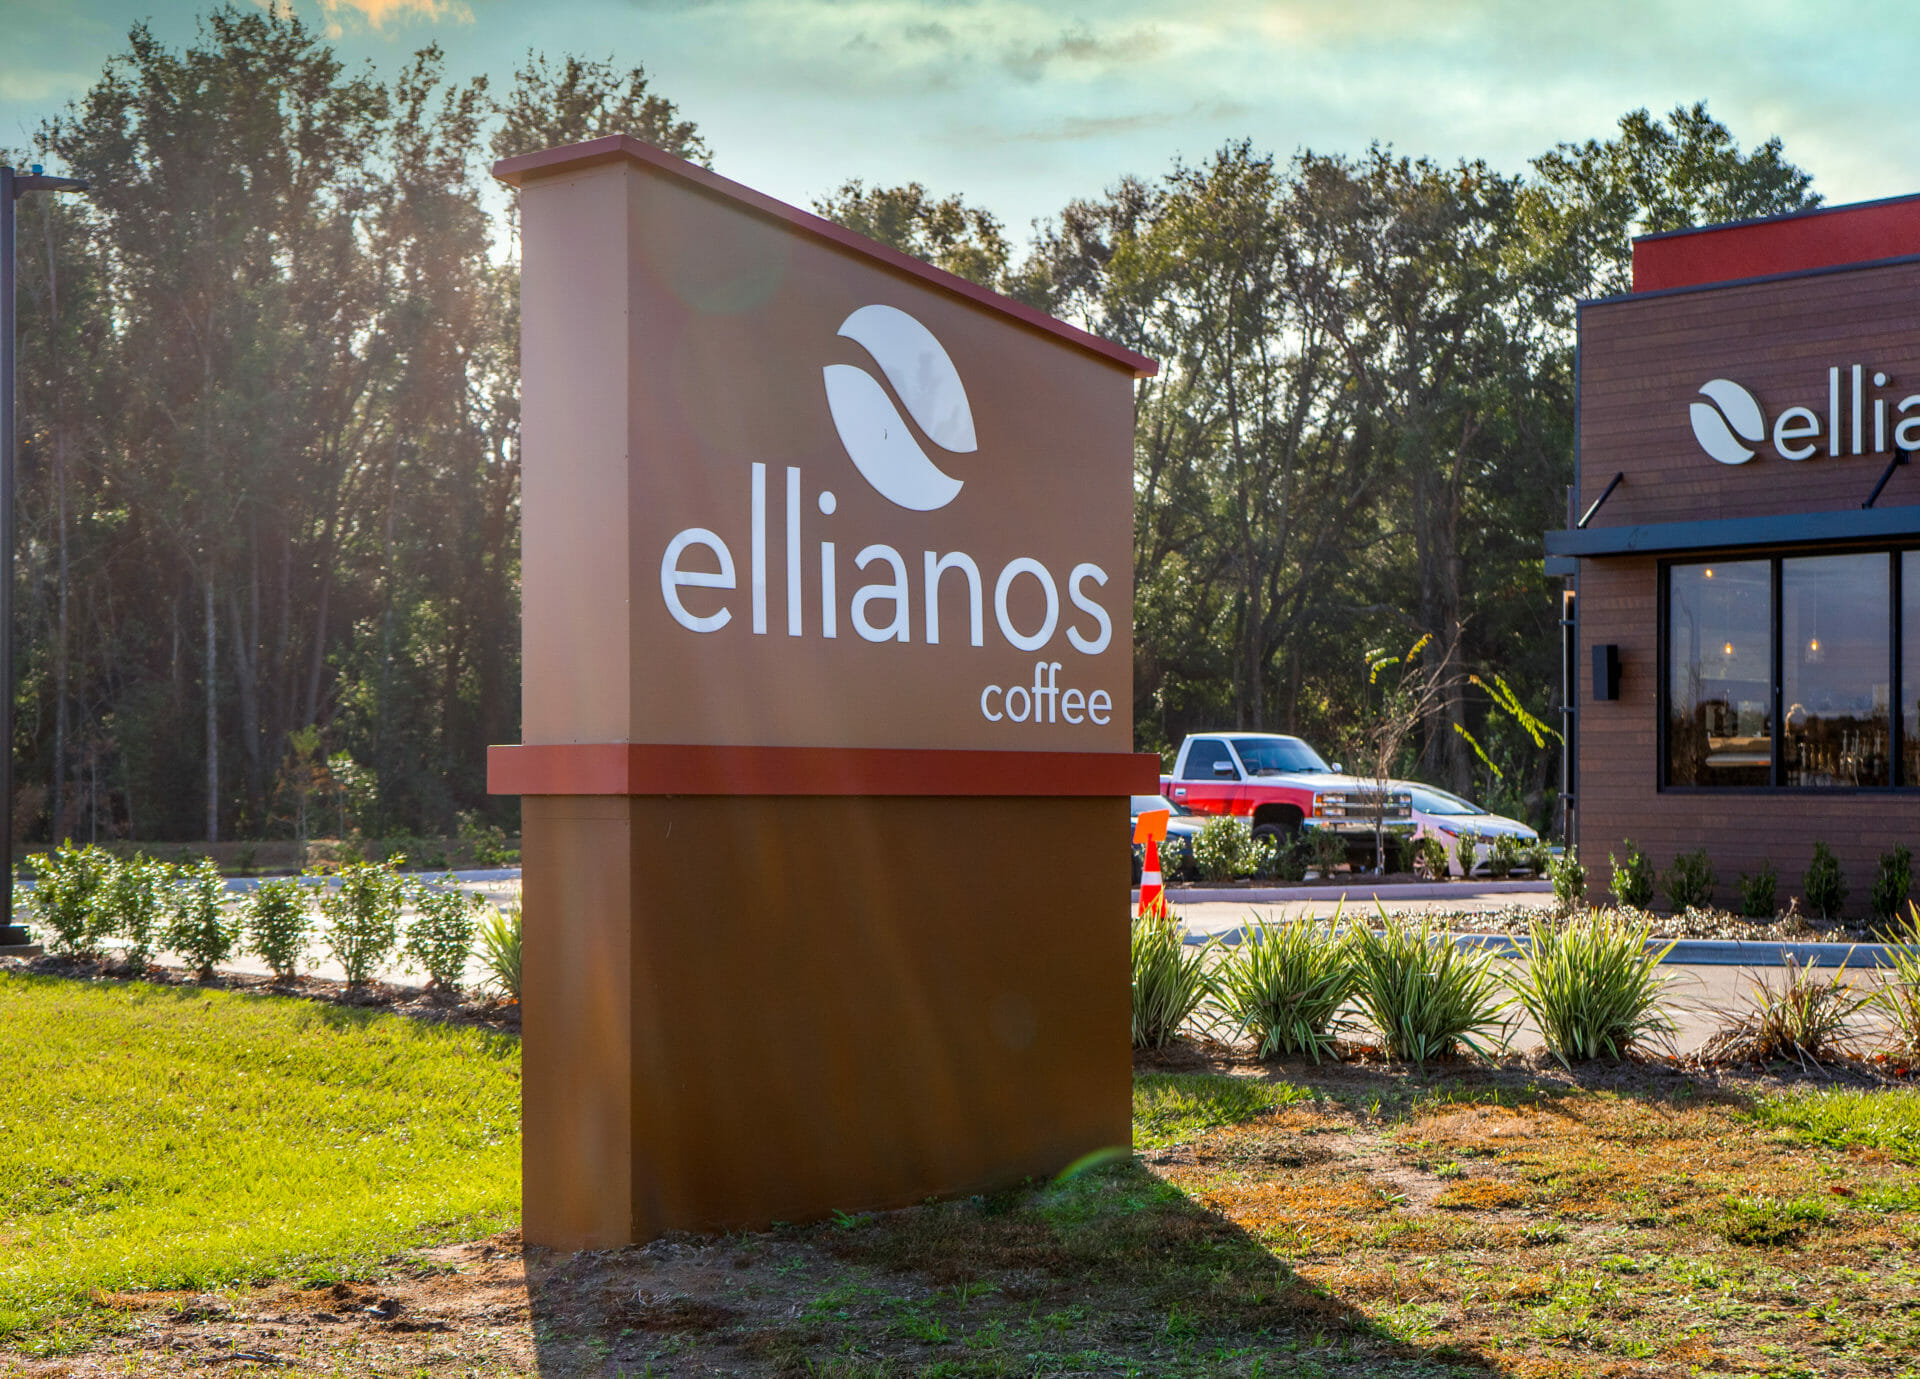 Grand Opening Date Set for New Ellianos Coffee Location in Valdosta